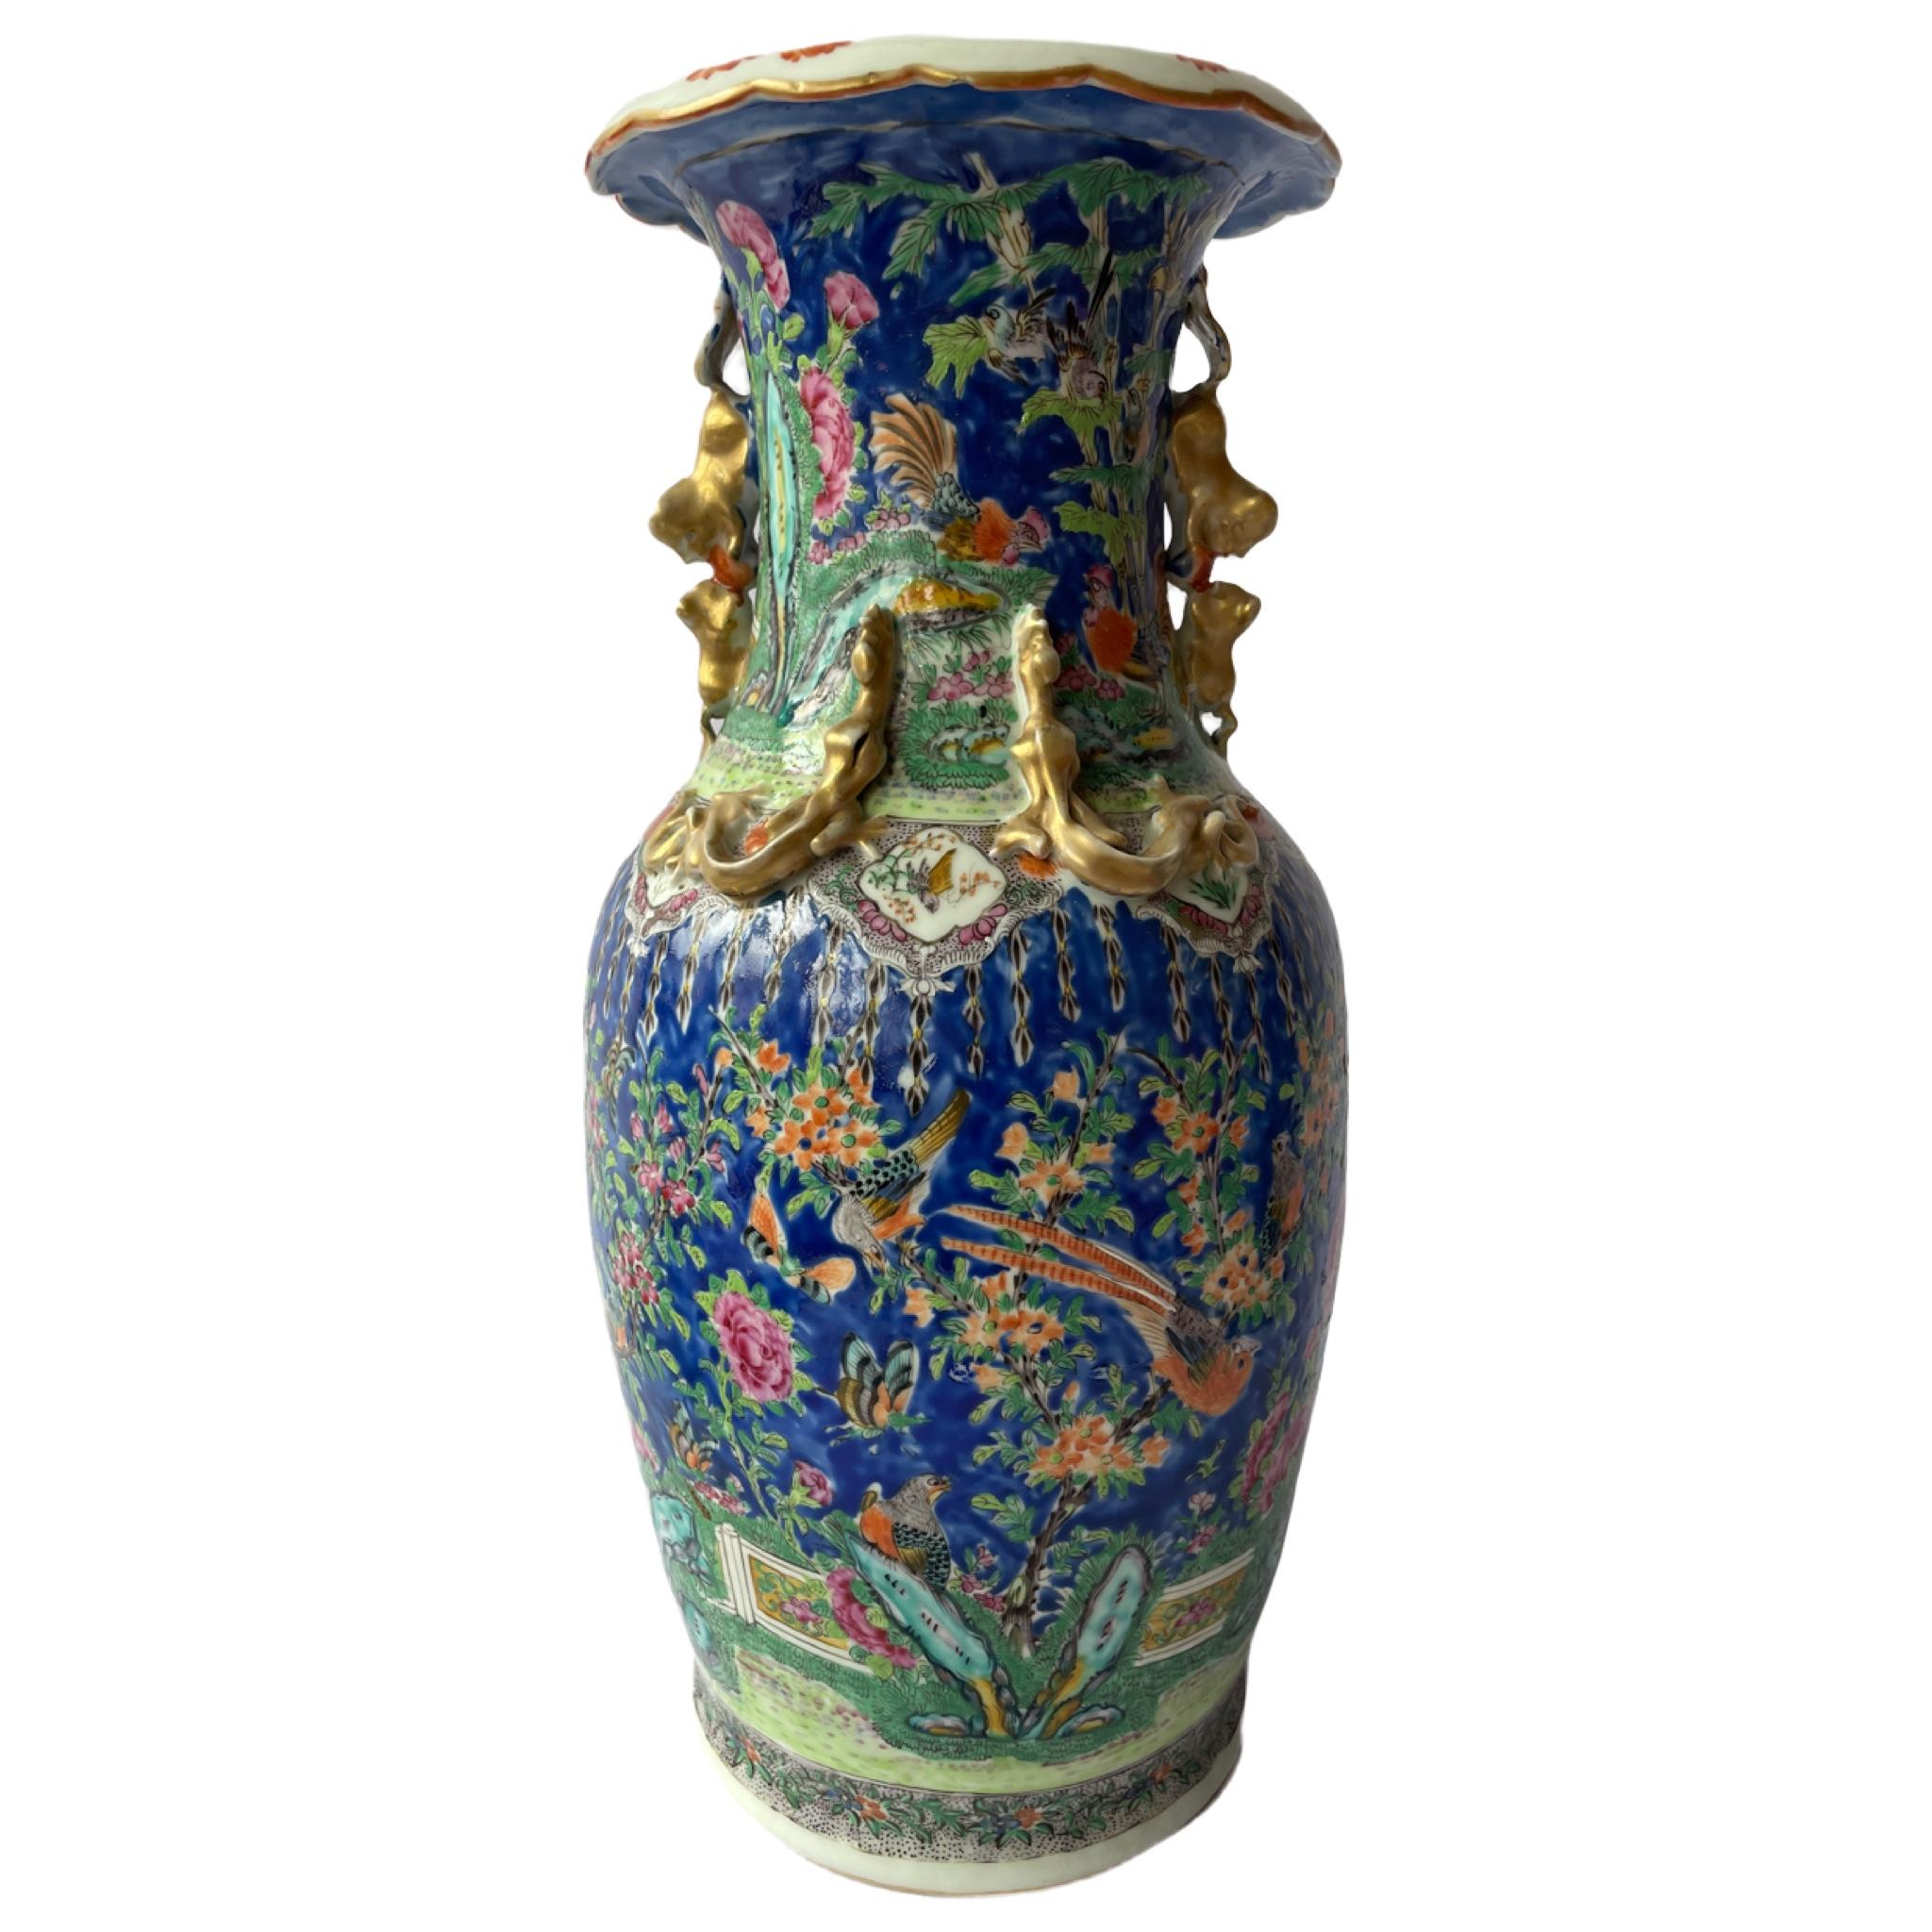 Famille Rose refers to a type of Chinese porcelain characterized by the use of opaque, brightly colored enamels, prominently featuring shades of pink, purple, green, and yellow. The term 